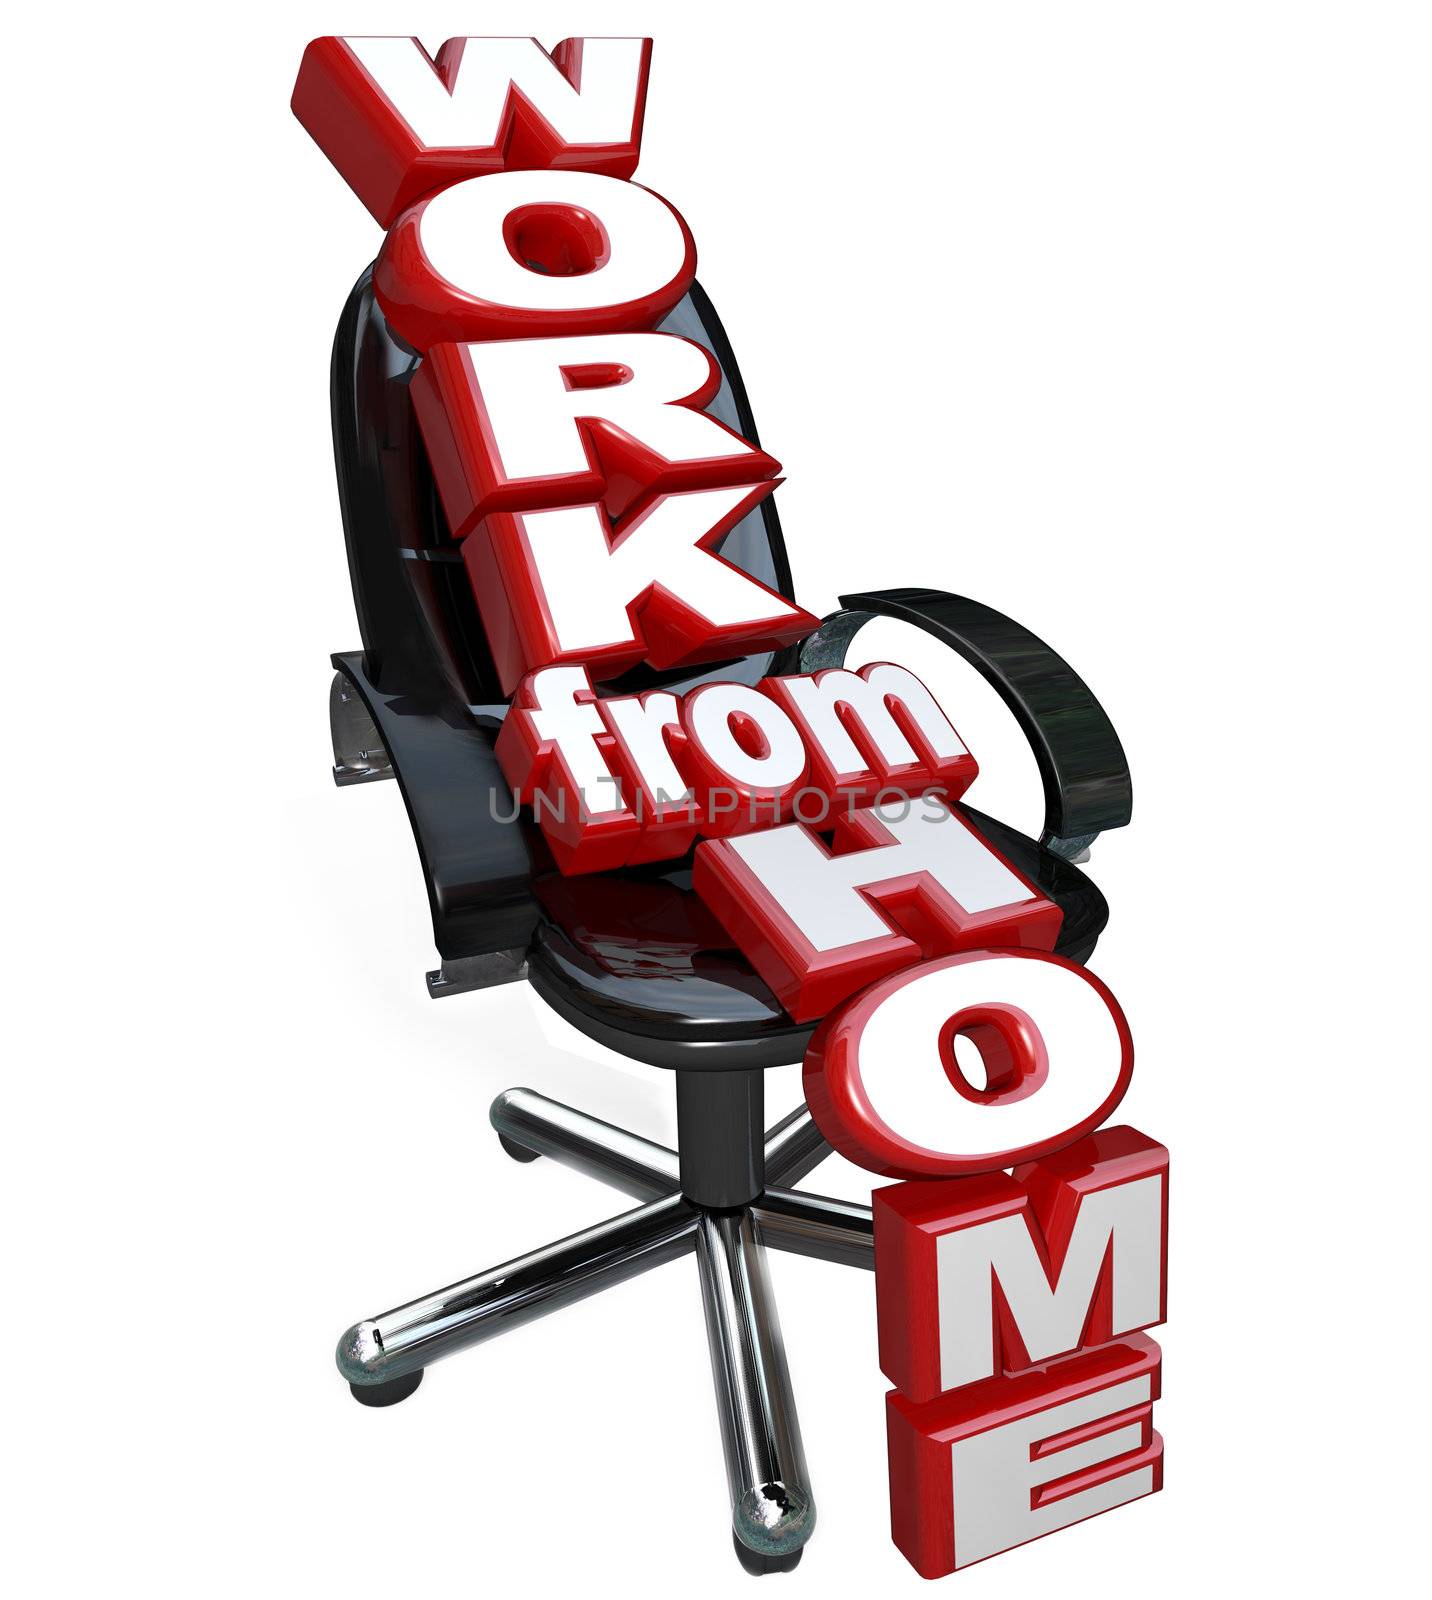 Enjoy the flexibility of working from home and managing your professional time effectively, with this chair and the words Work From Home on it representing the opportunity to telecommute